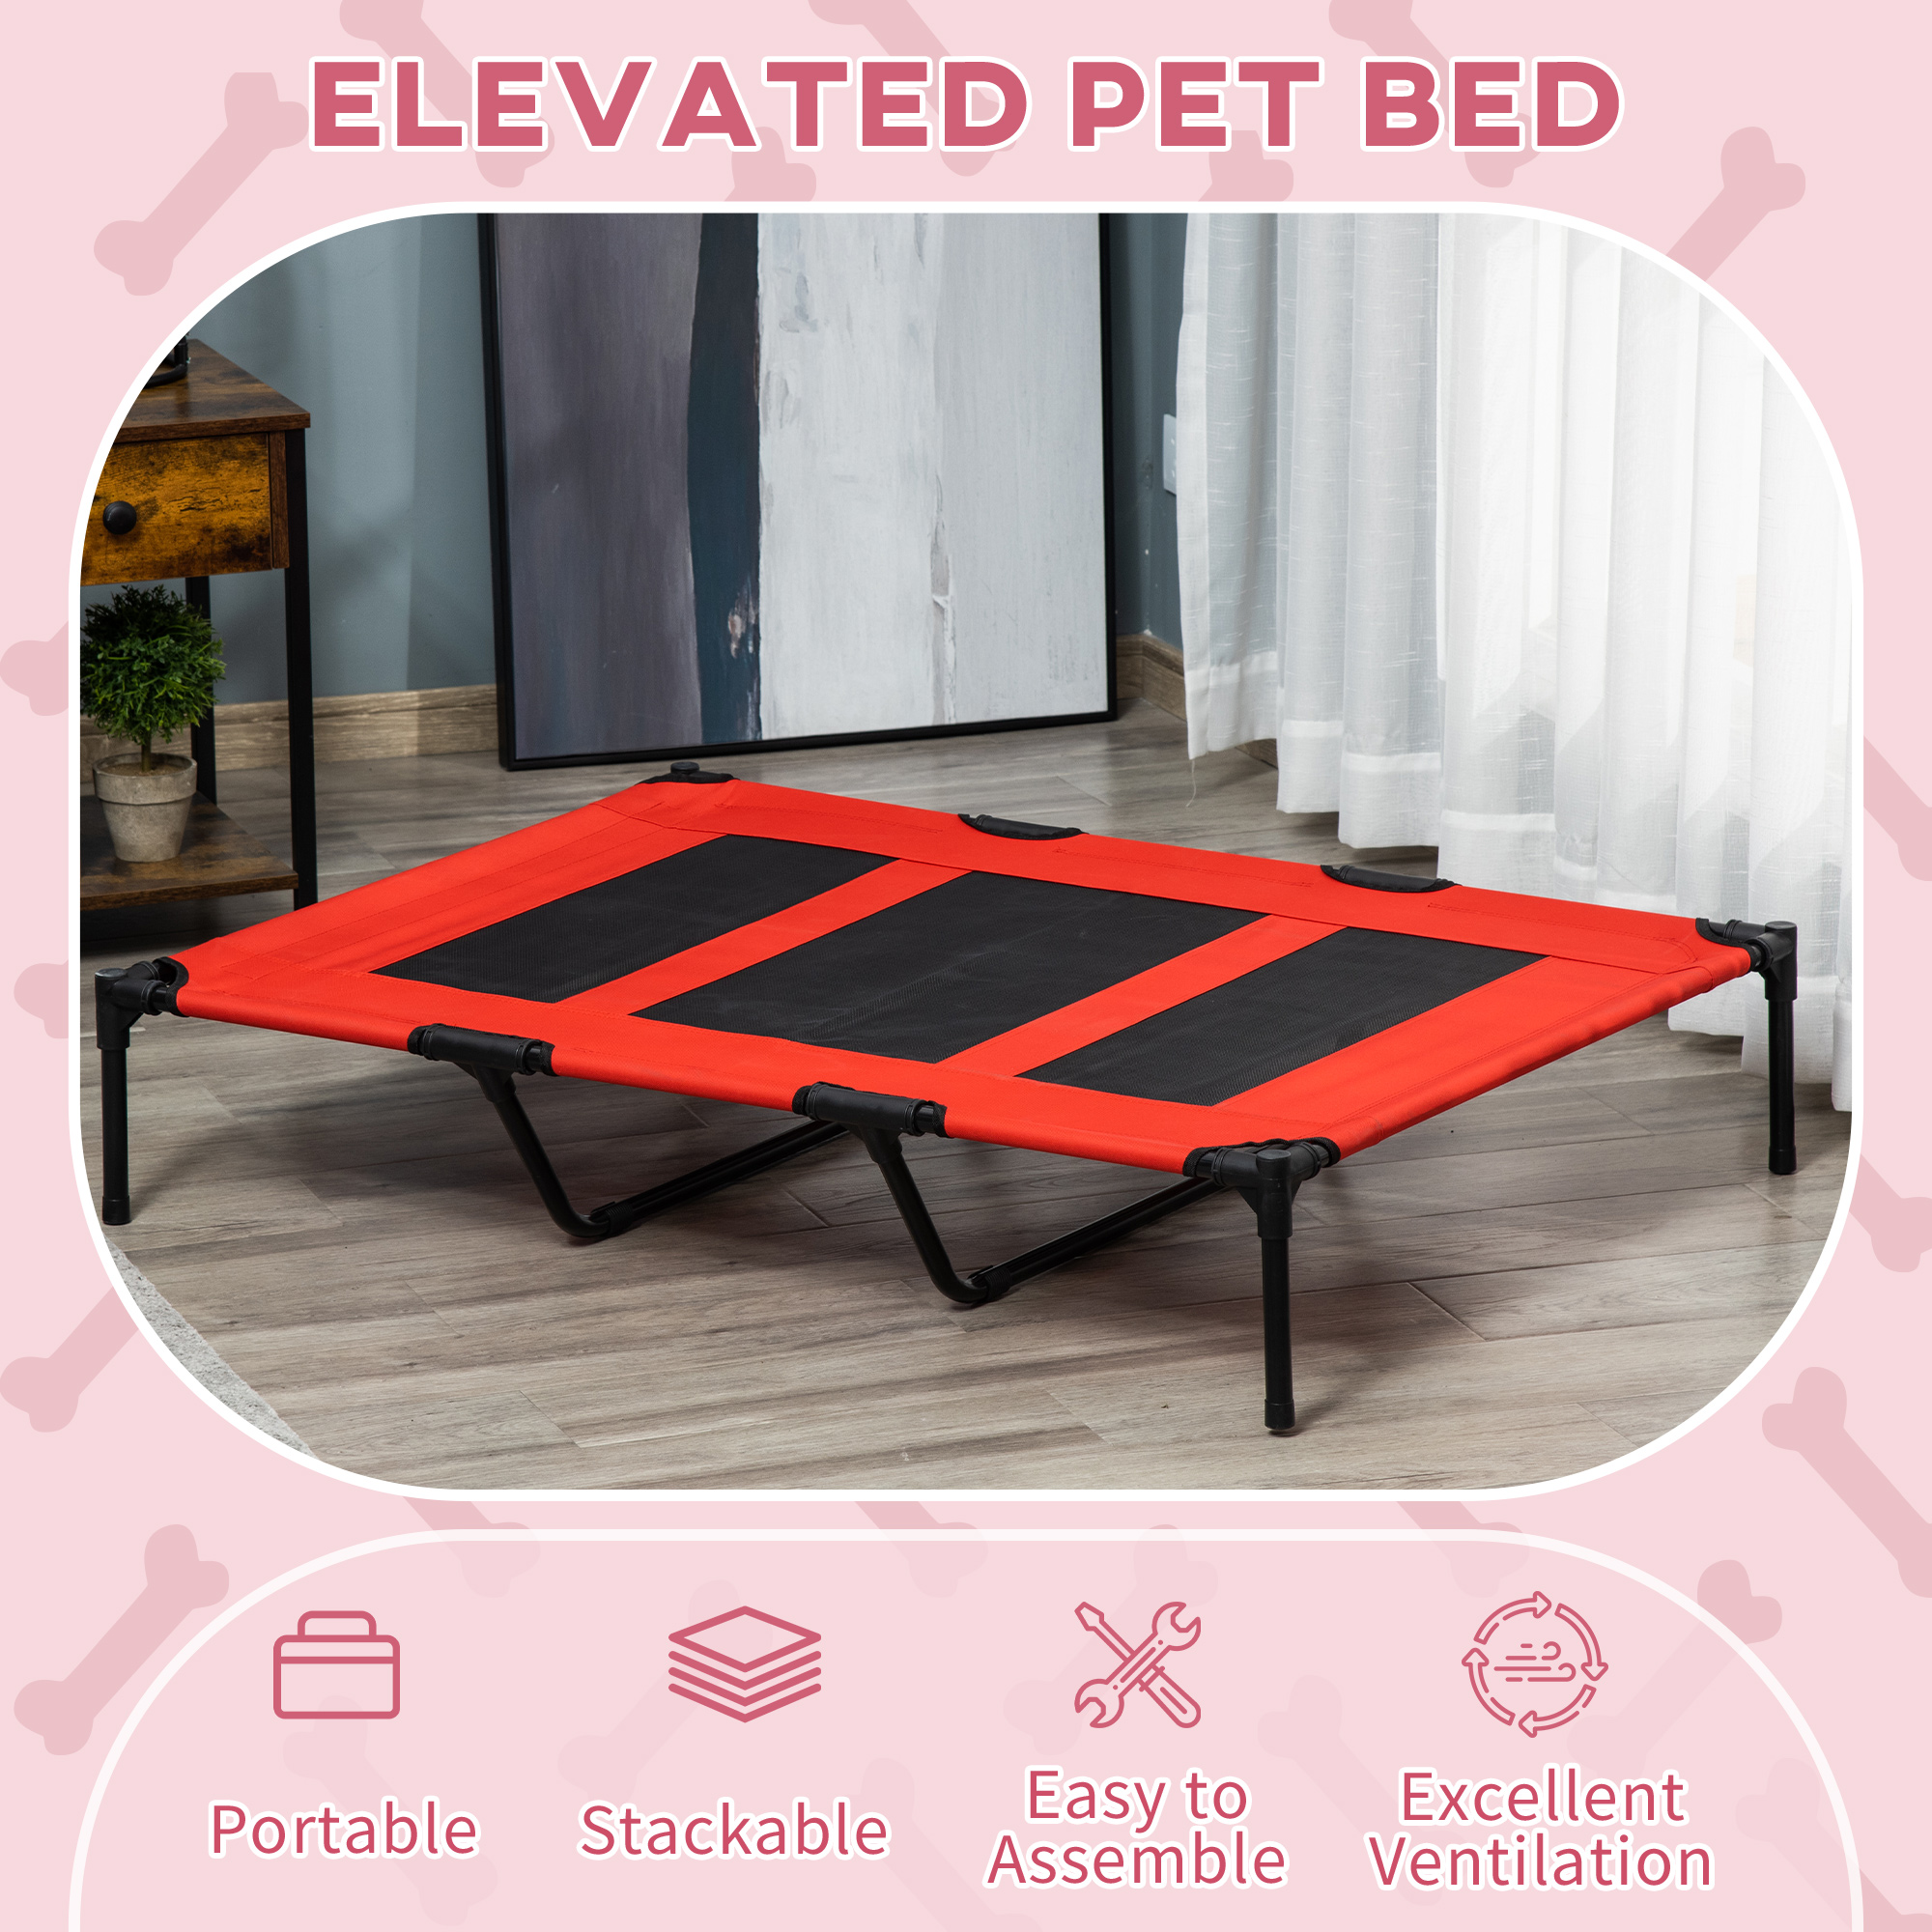 Pawhut 48" x 36" Elevated Folding Dog Cot Cooling Summer Pet Bed, Red - image 3 of 9